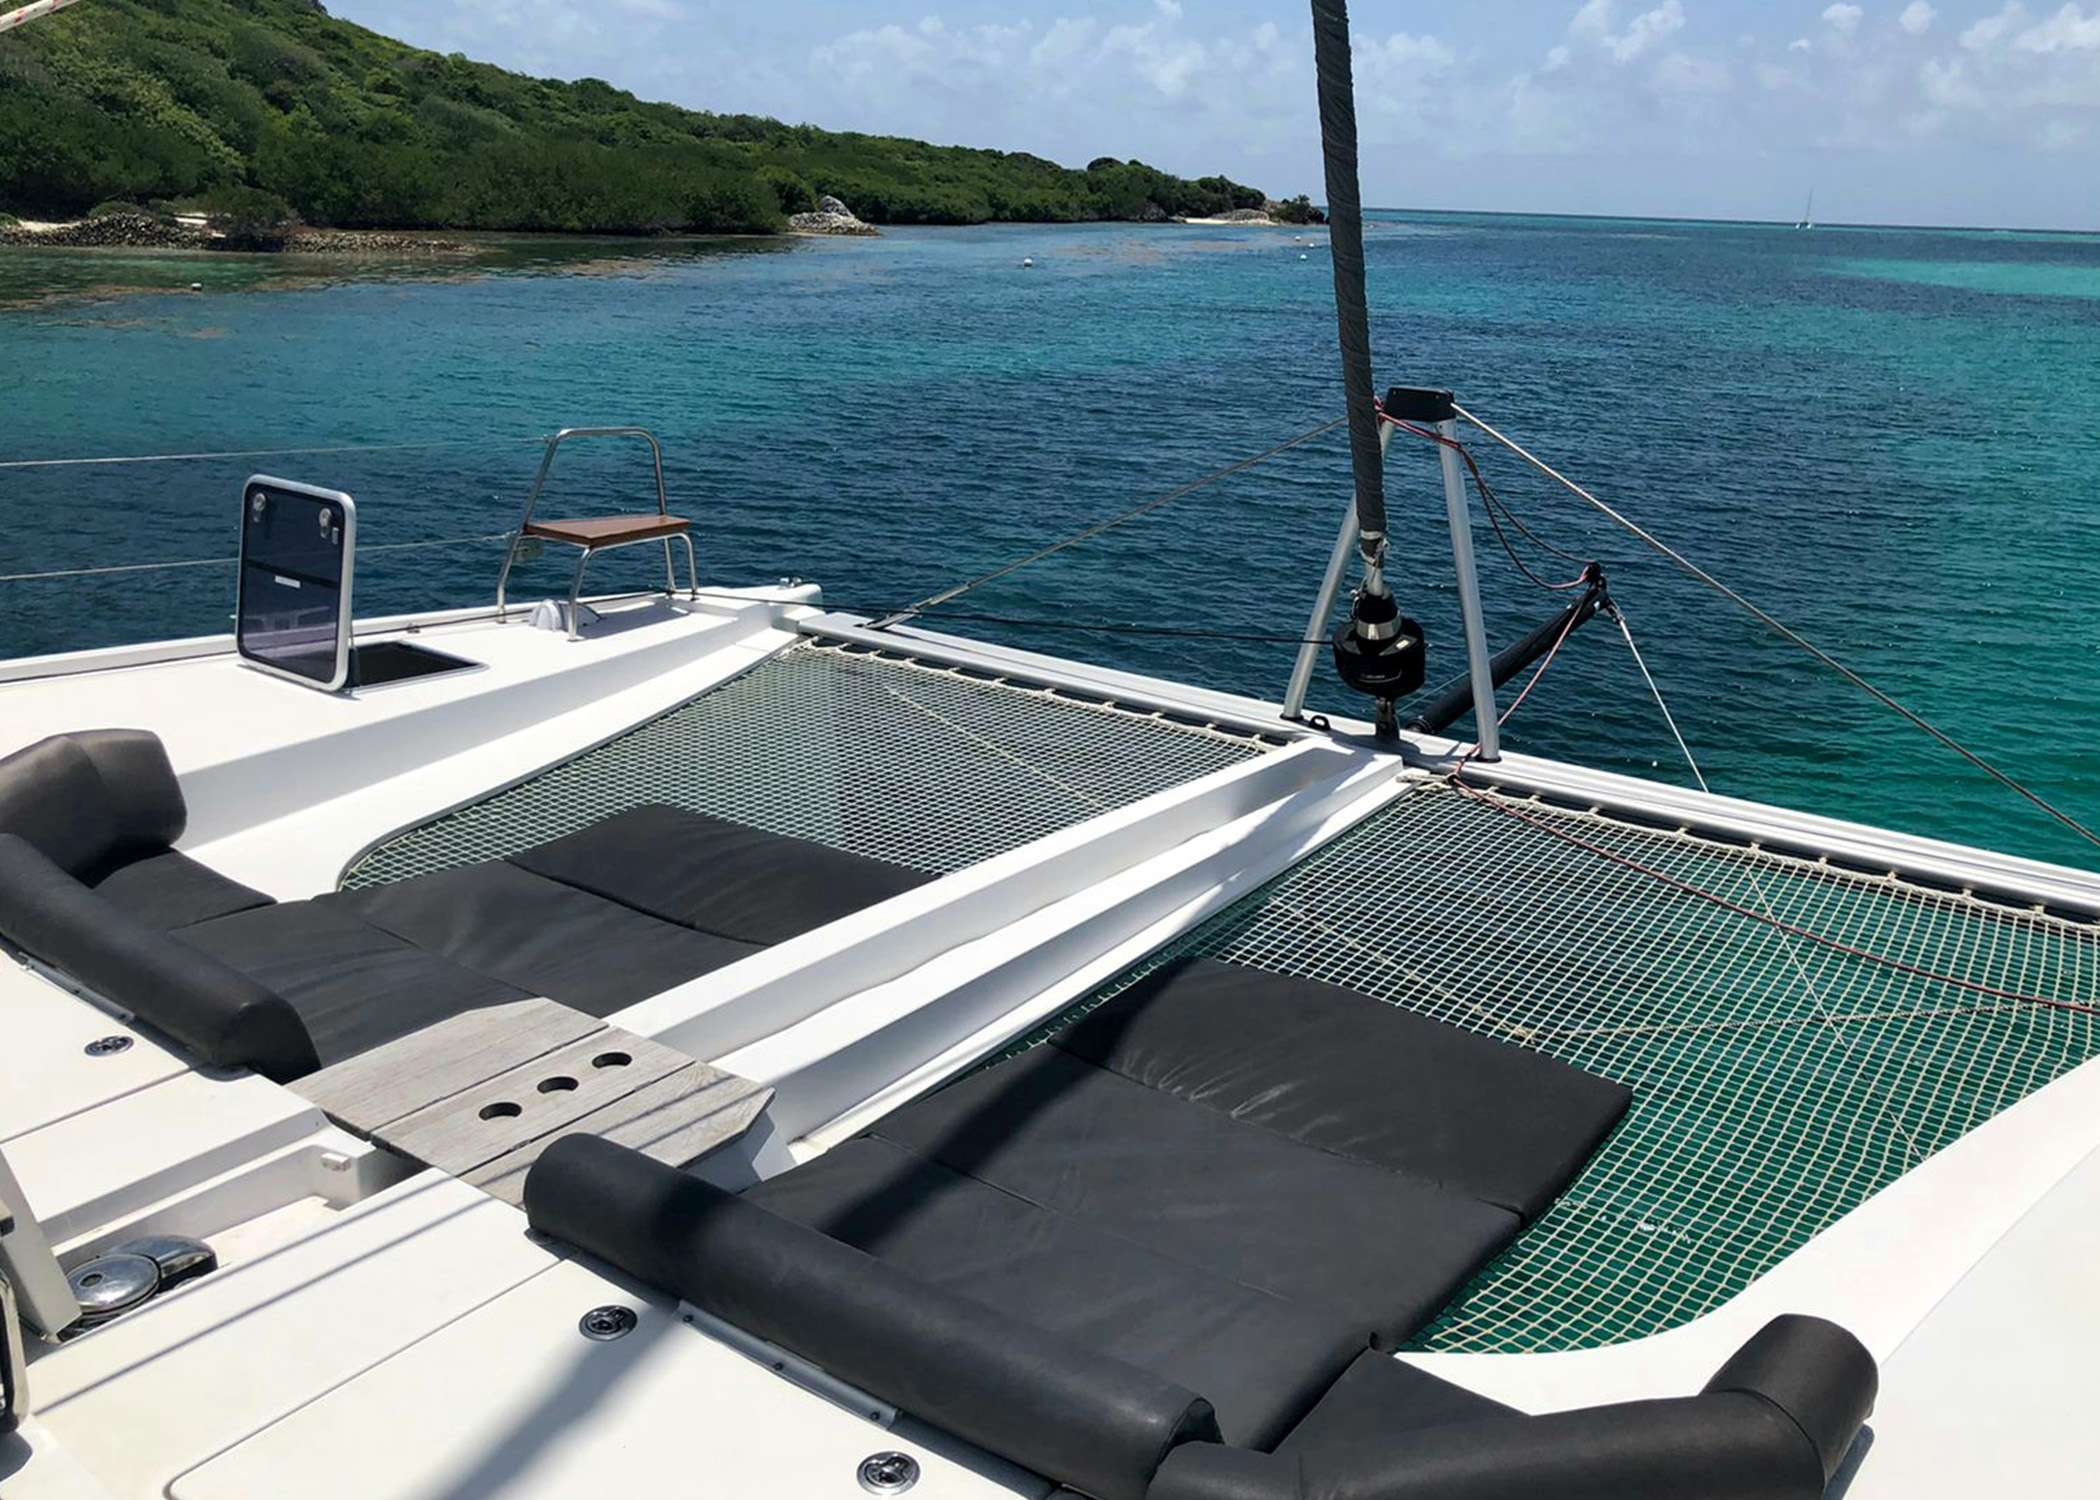 Freedom - Yacht Charter Netherlands Antilles & Boat hire in Caribbean 5